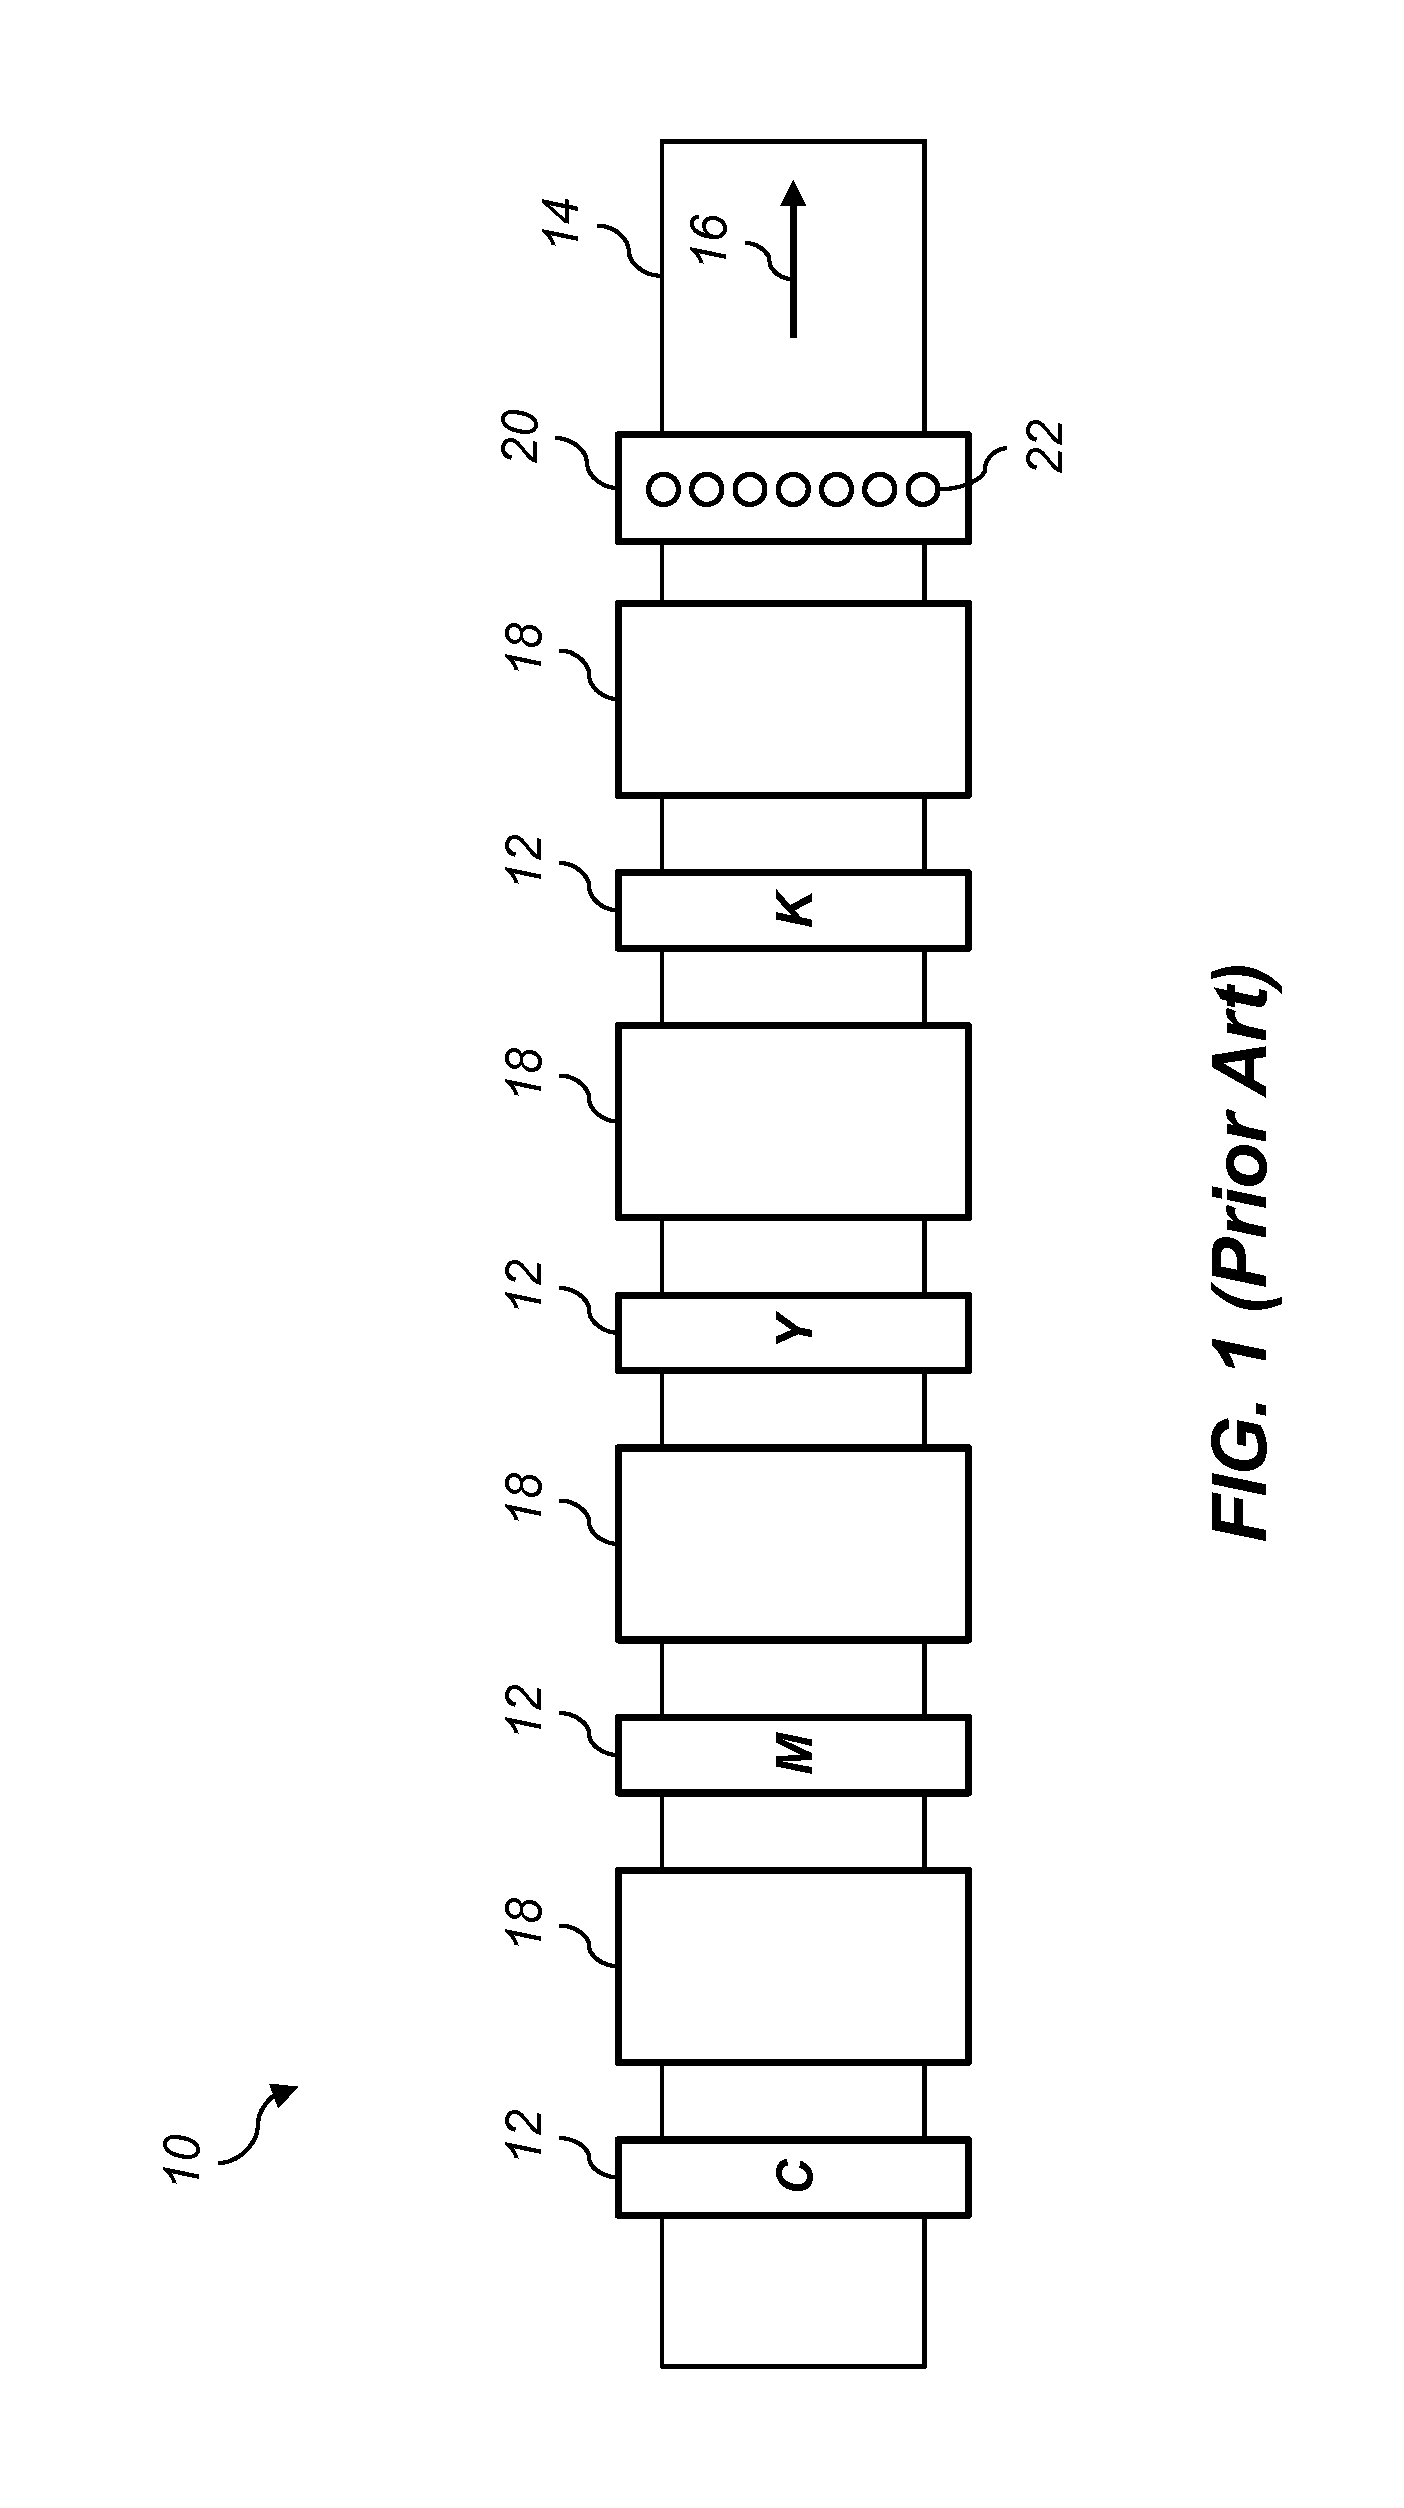 A method to determine an alignment errors in image data and performing in-track alignment errors correction using test pattern